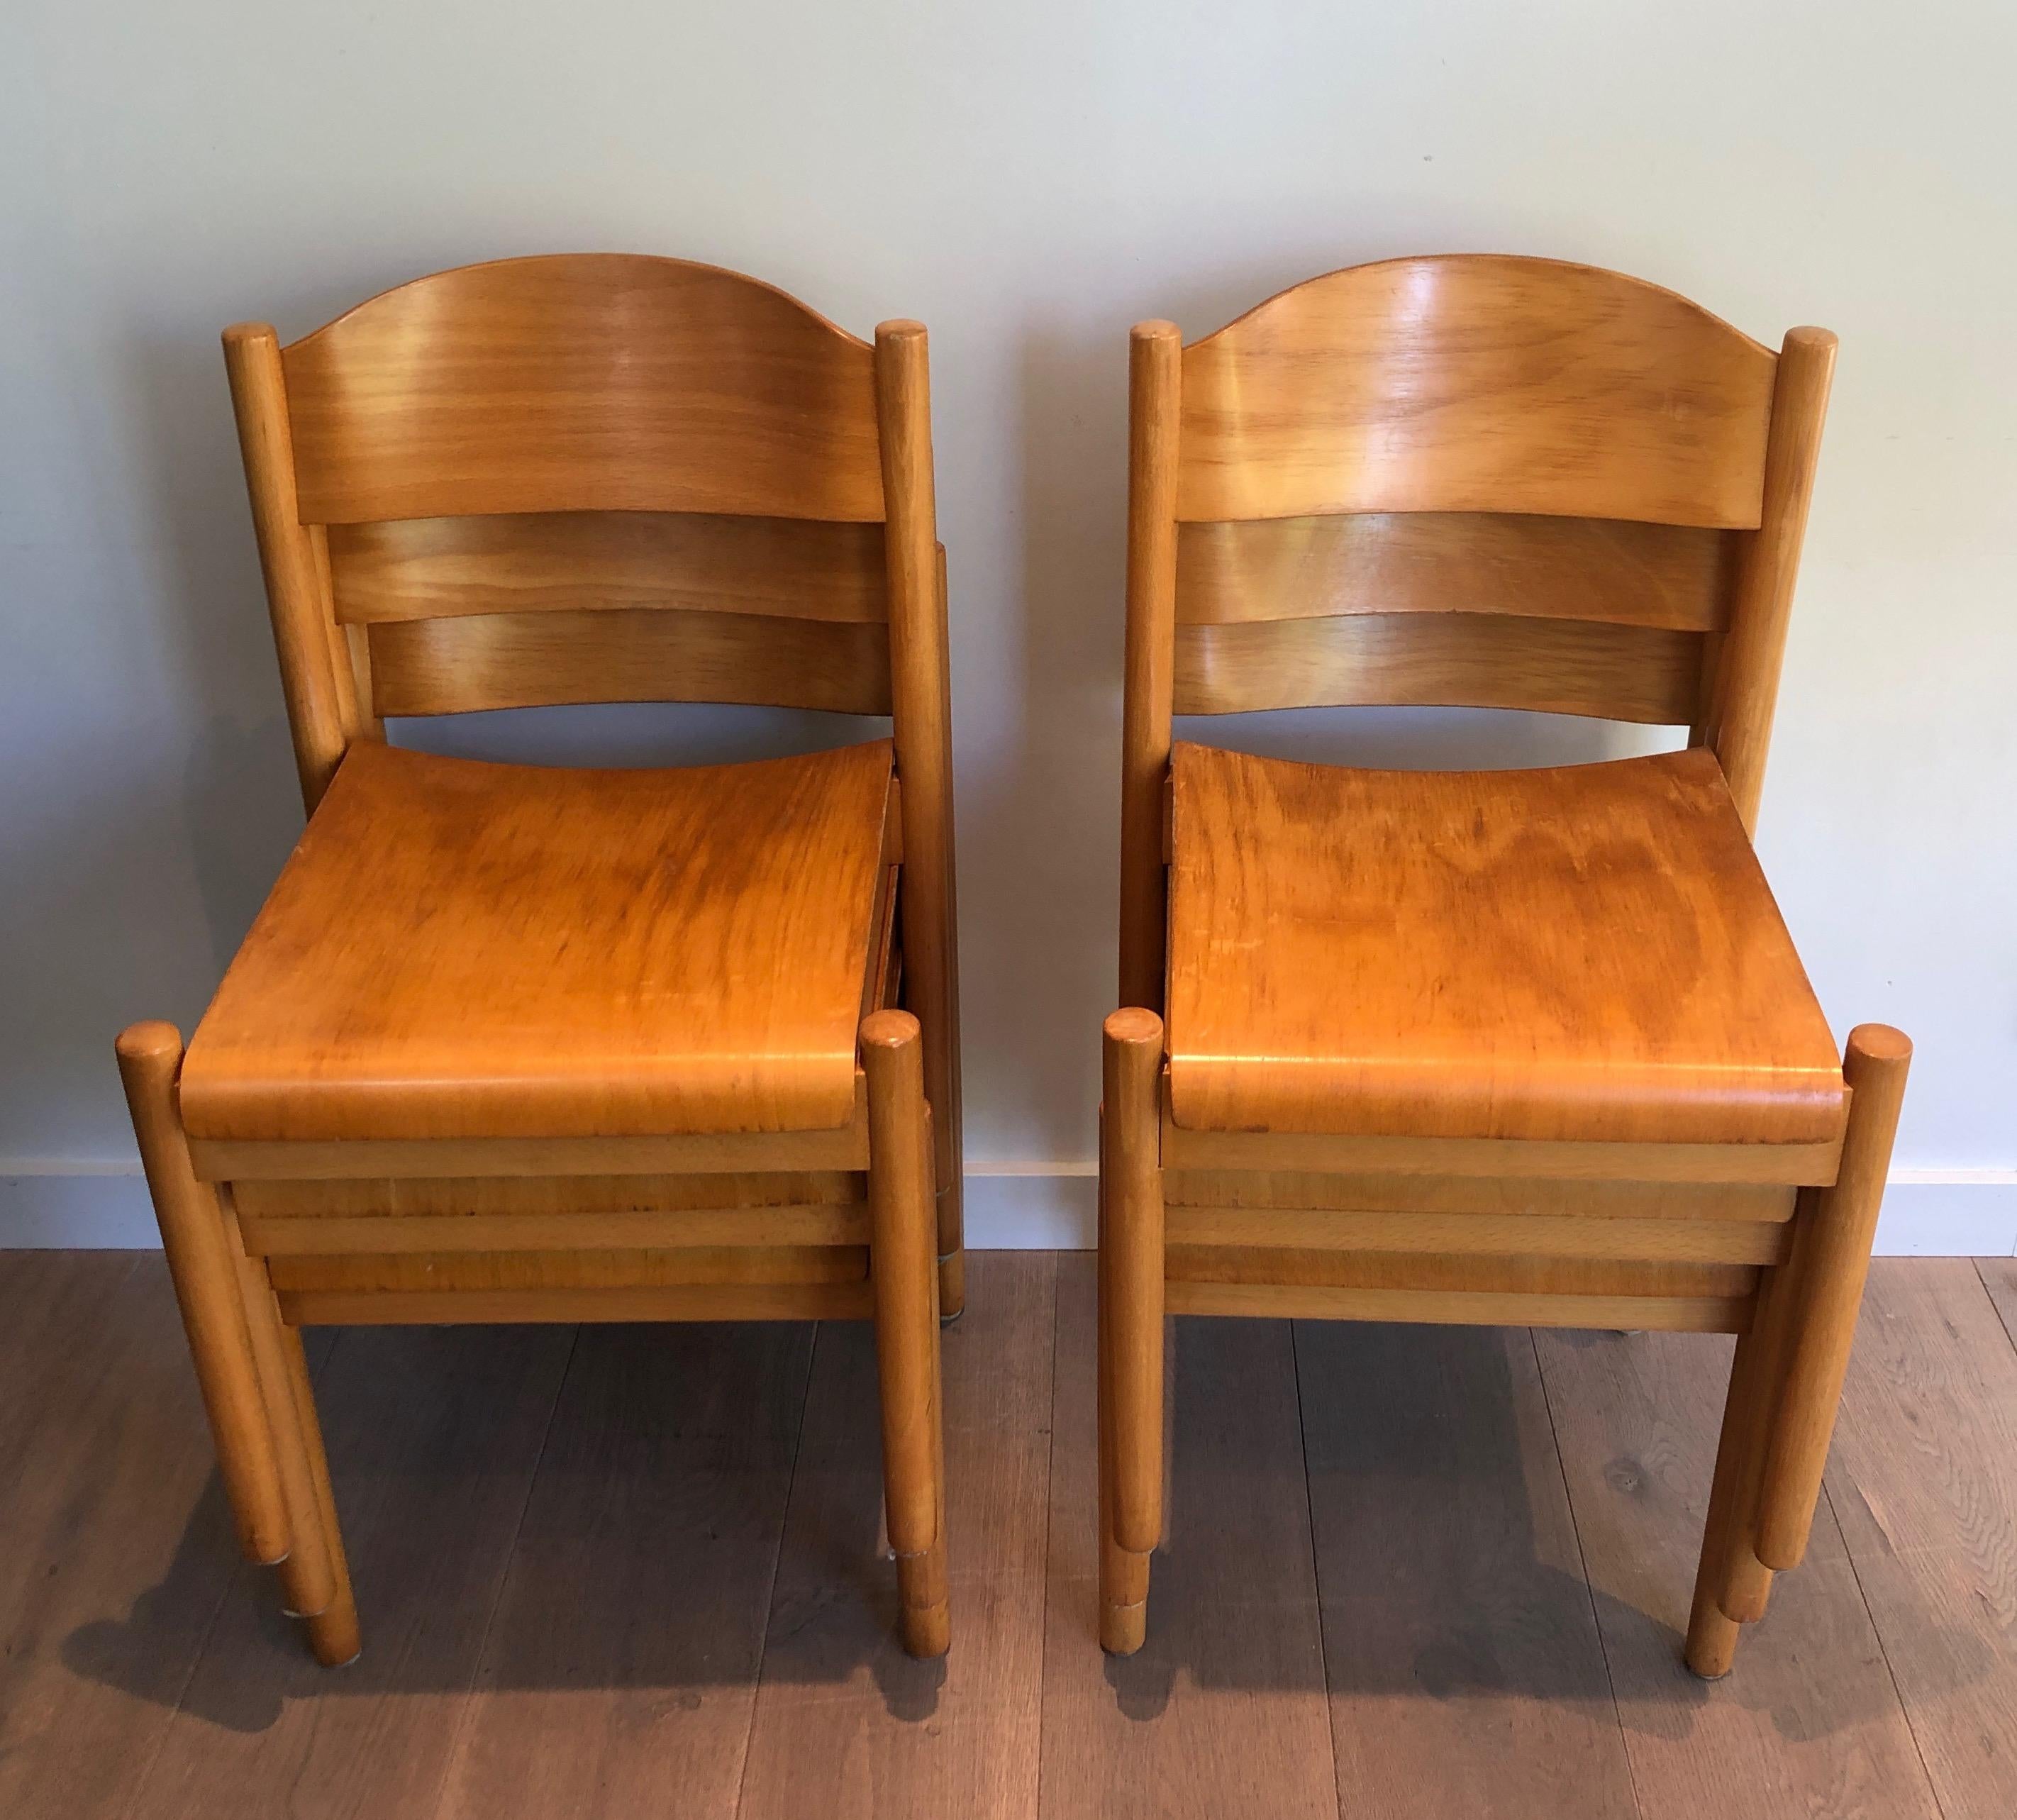 Mid-Century Modern Set of 6 Stackable Pine Chairs, German Work by Karl Klipper, Circa 1970 For Sale